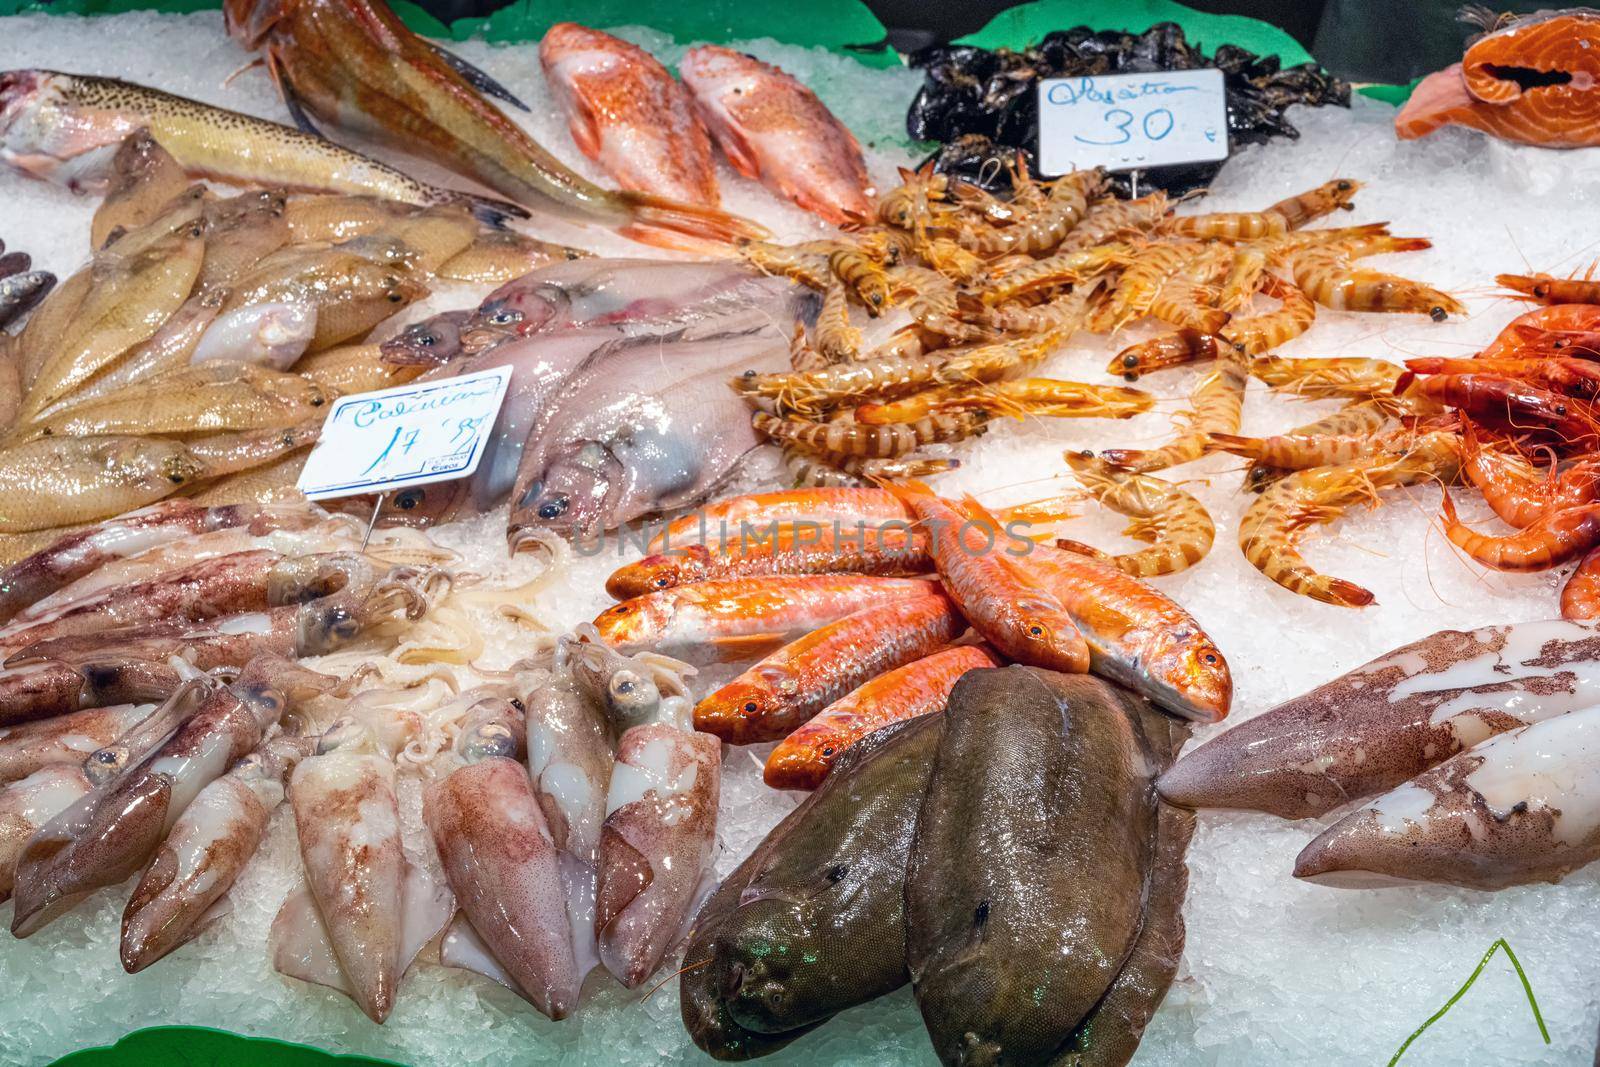 Squid, fish and seafood for sale at a market